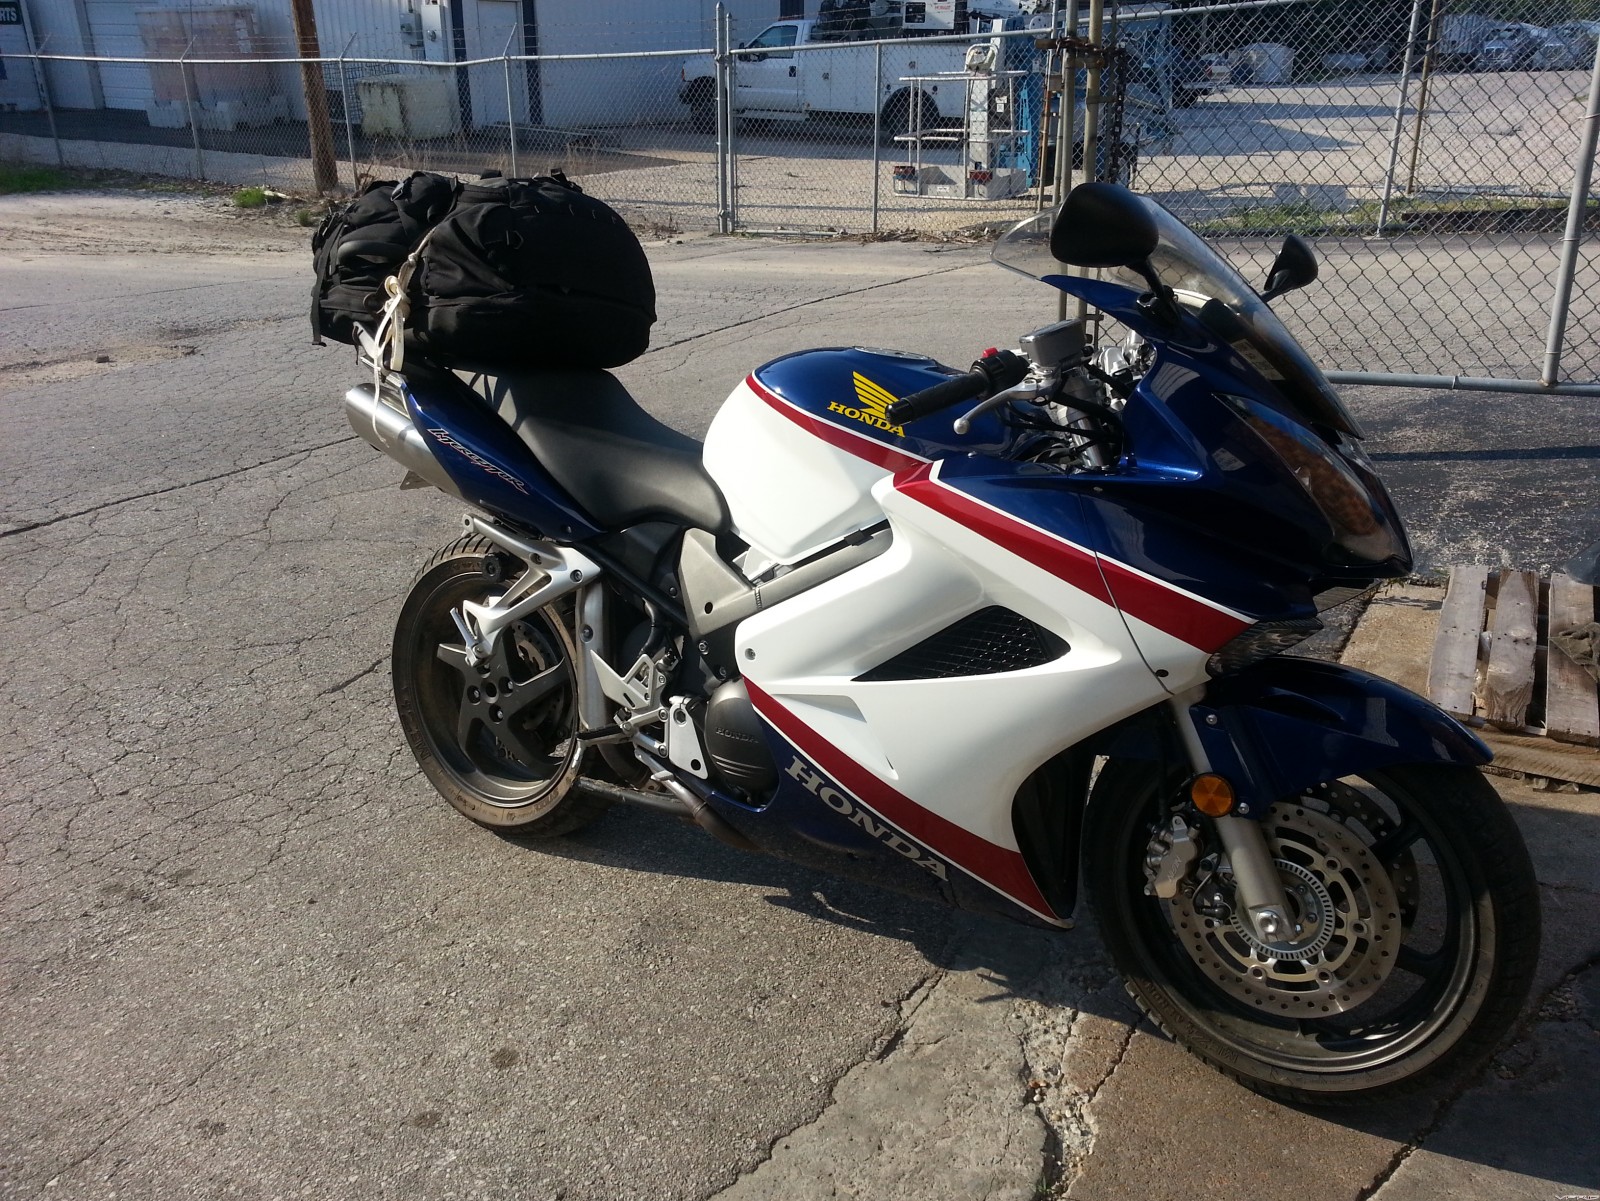 The New (to me) VFR